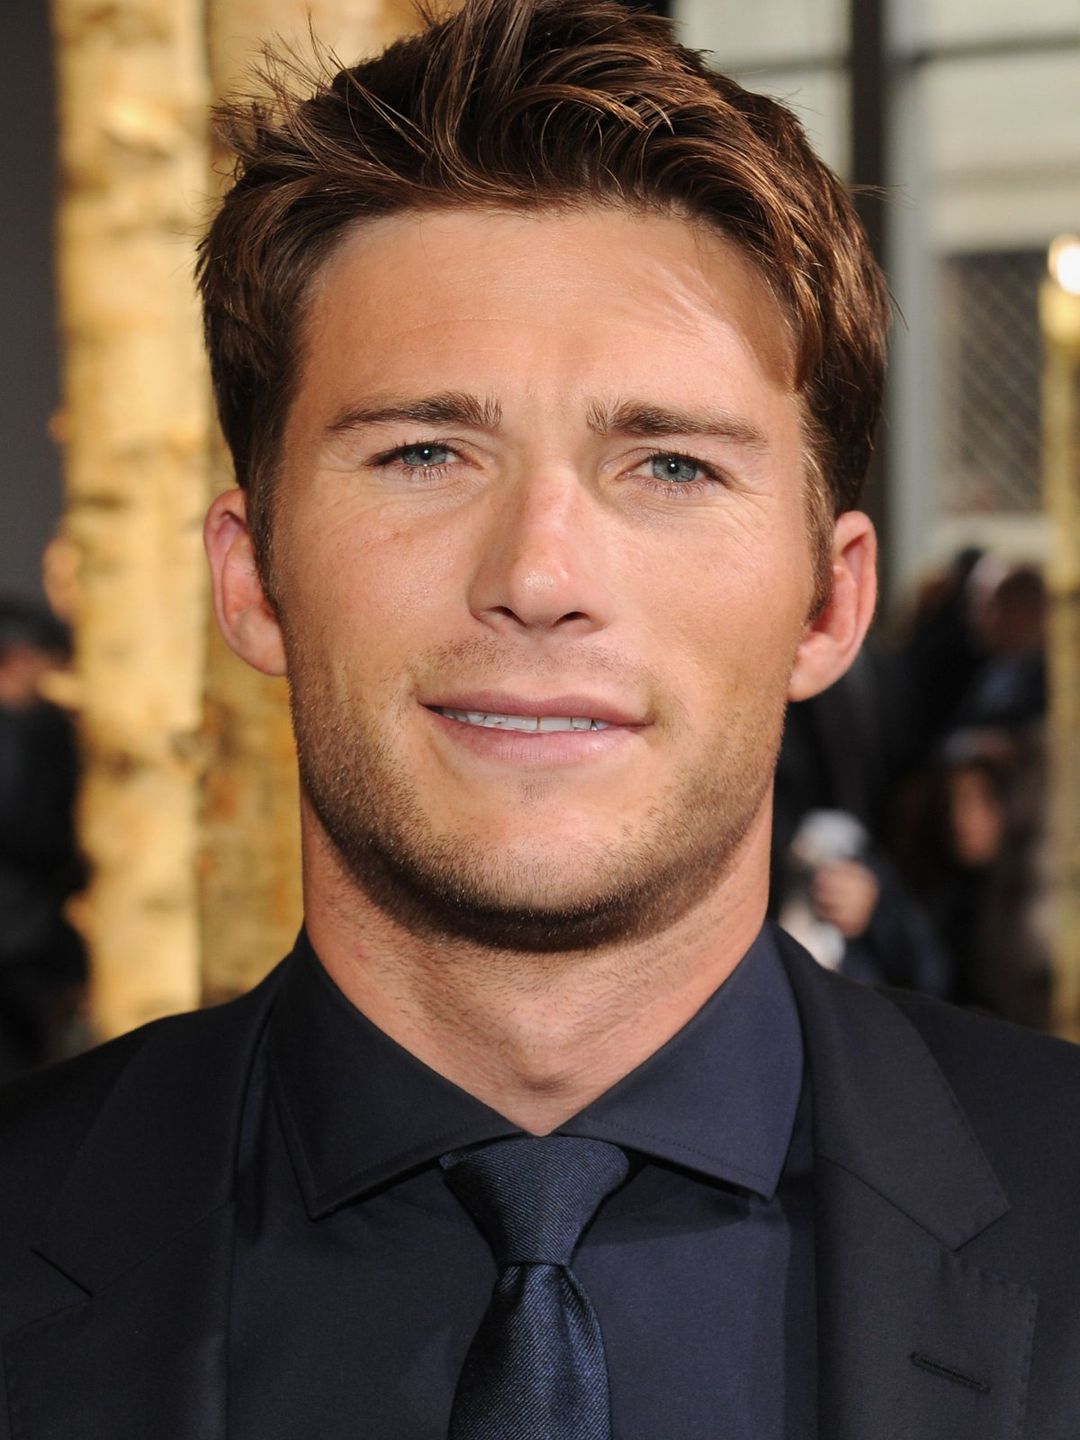 Scott Eastwood young age